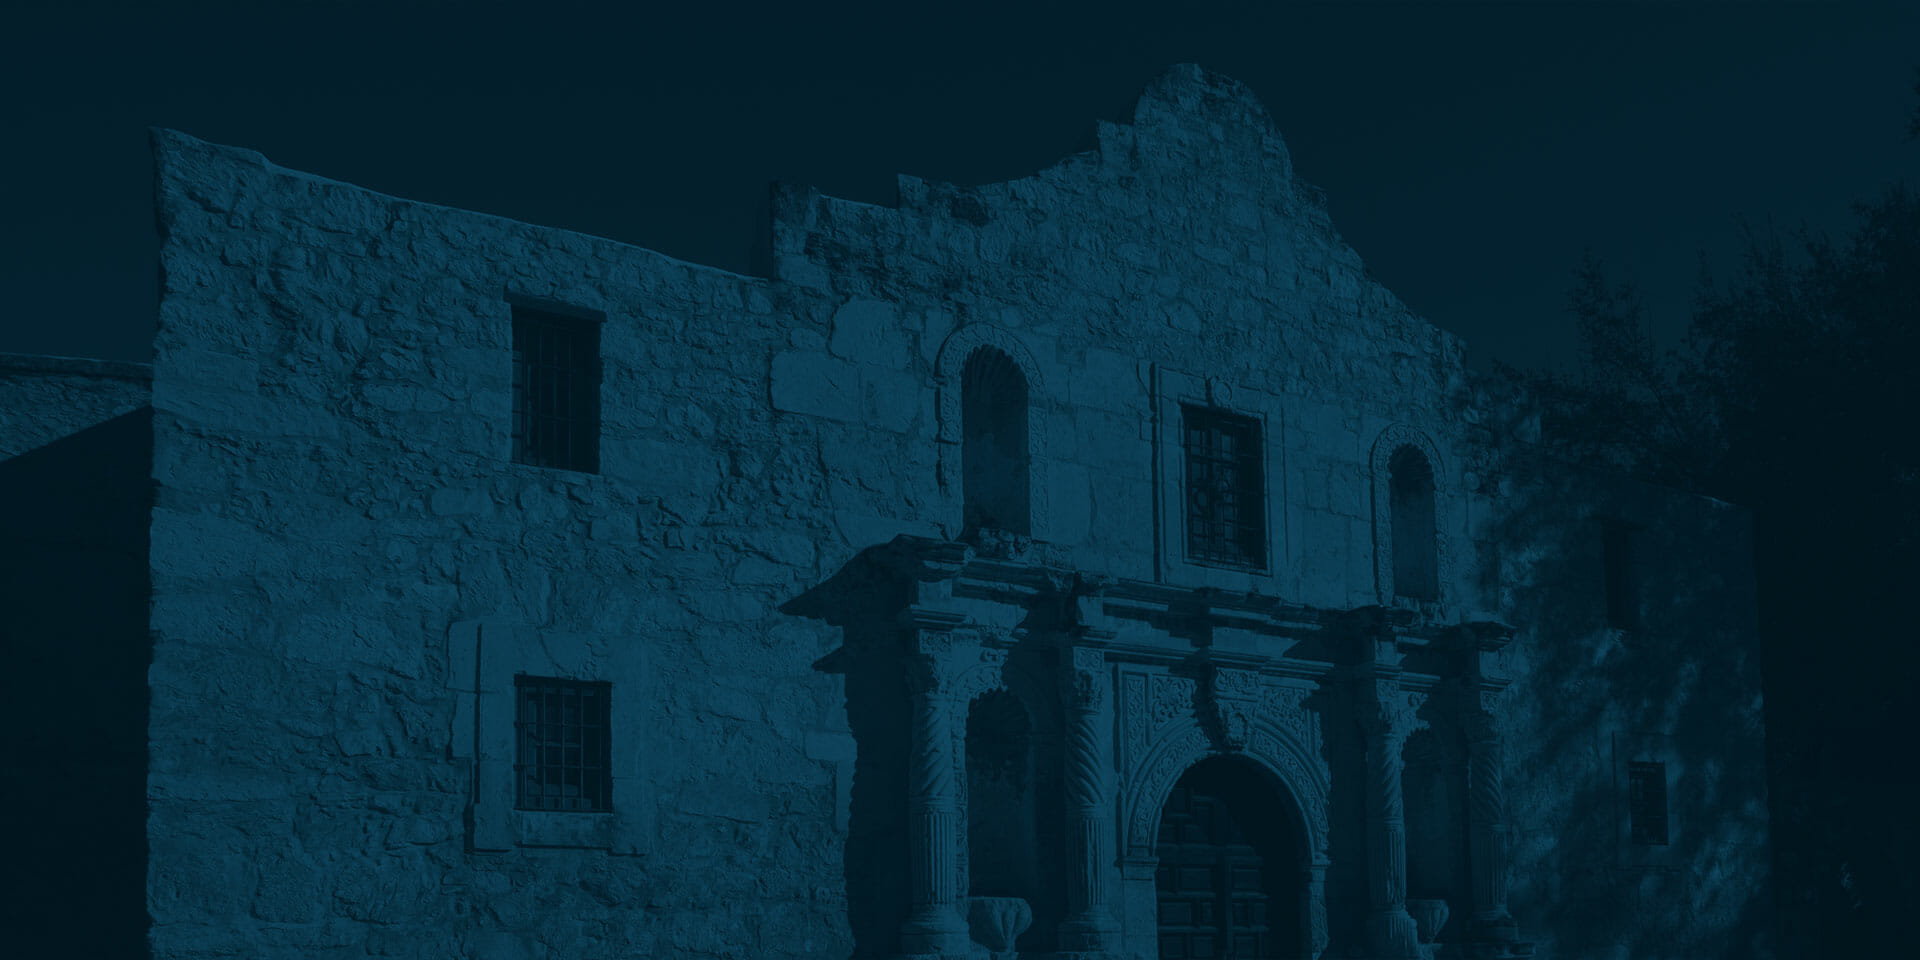 The Alamo's Mission Building with a text overlay.  CalTex Protective Coatings is A Best Place To Work In San Antonio, Texas.